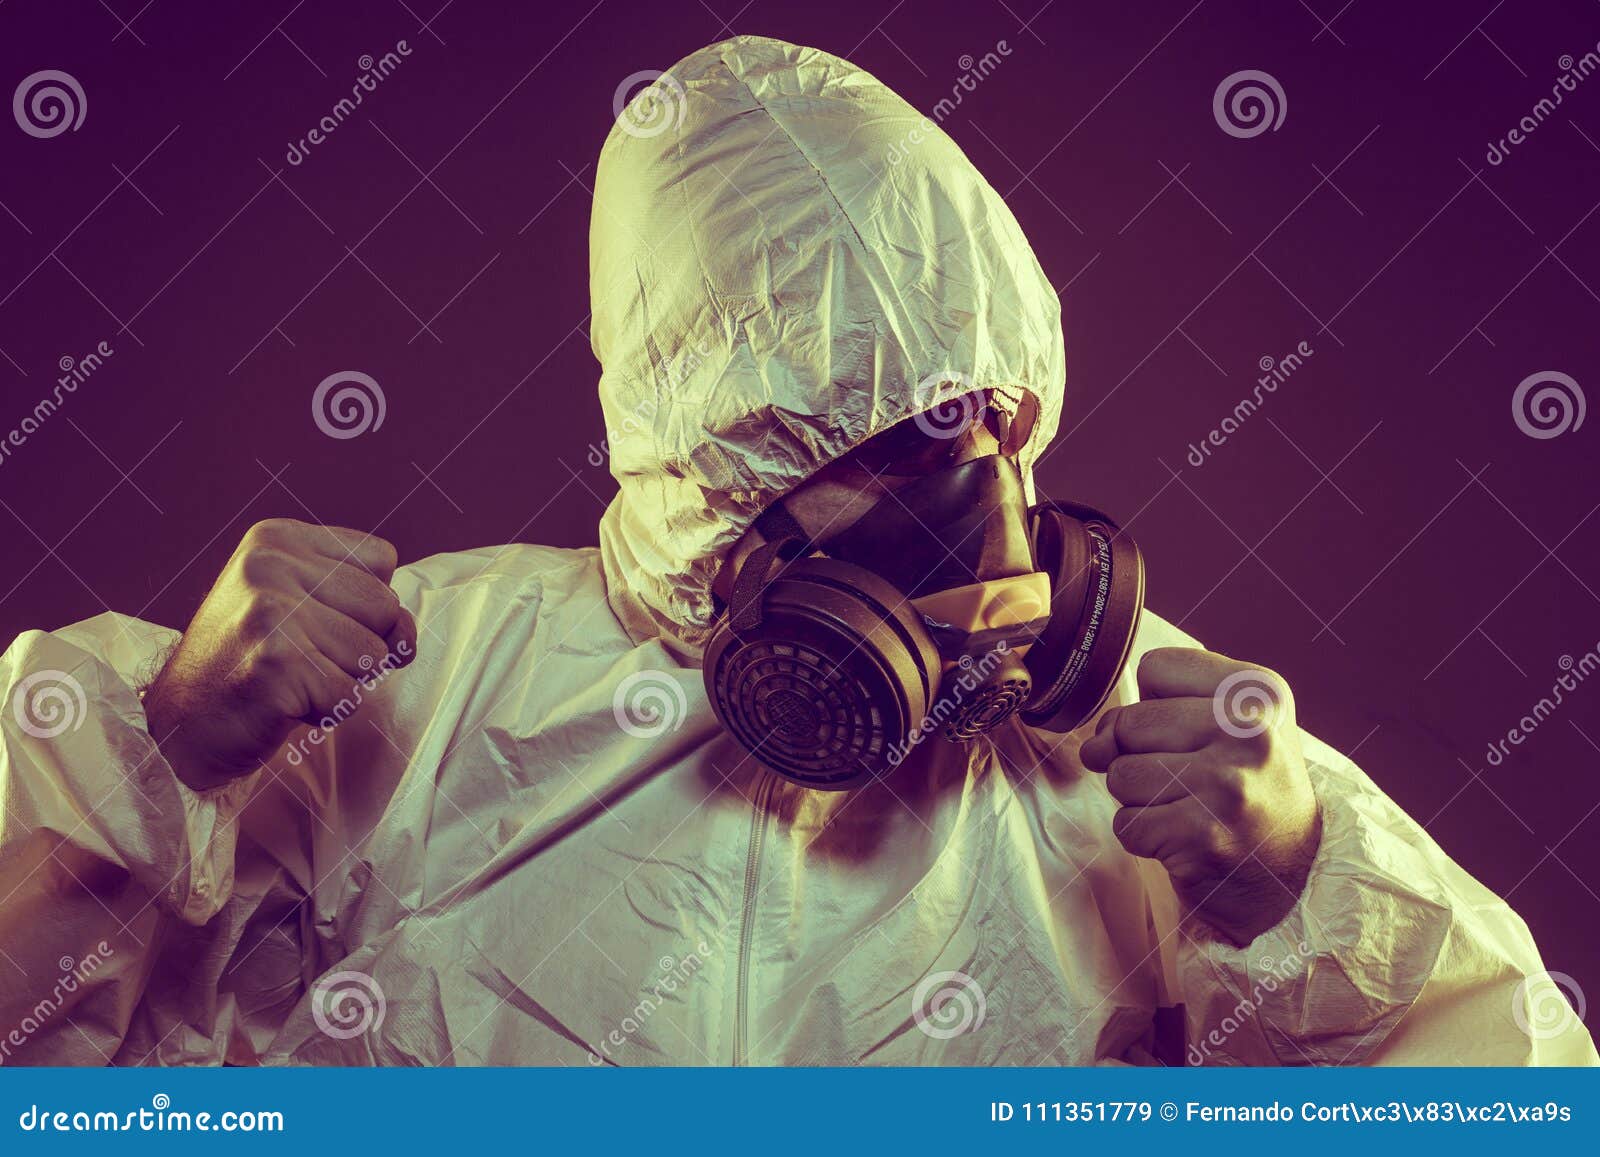 virus infection concept. man in protective suit and antigas mask